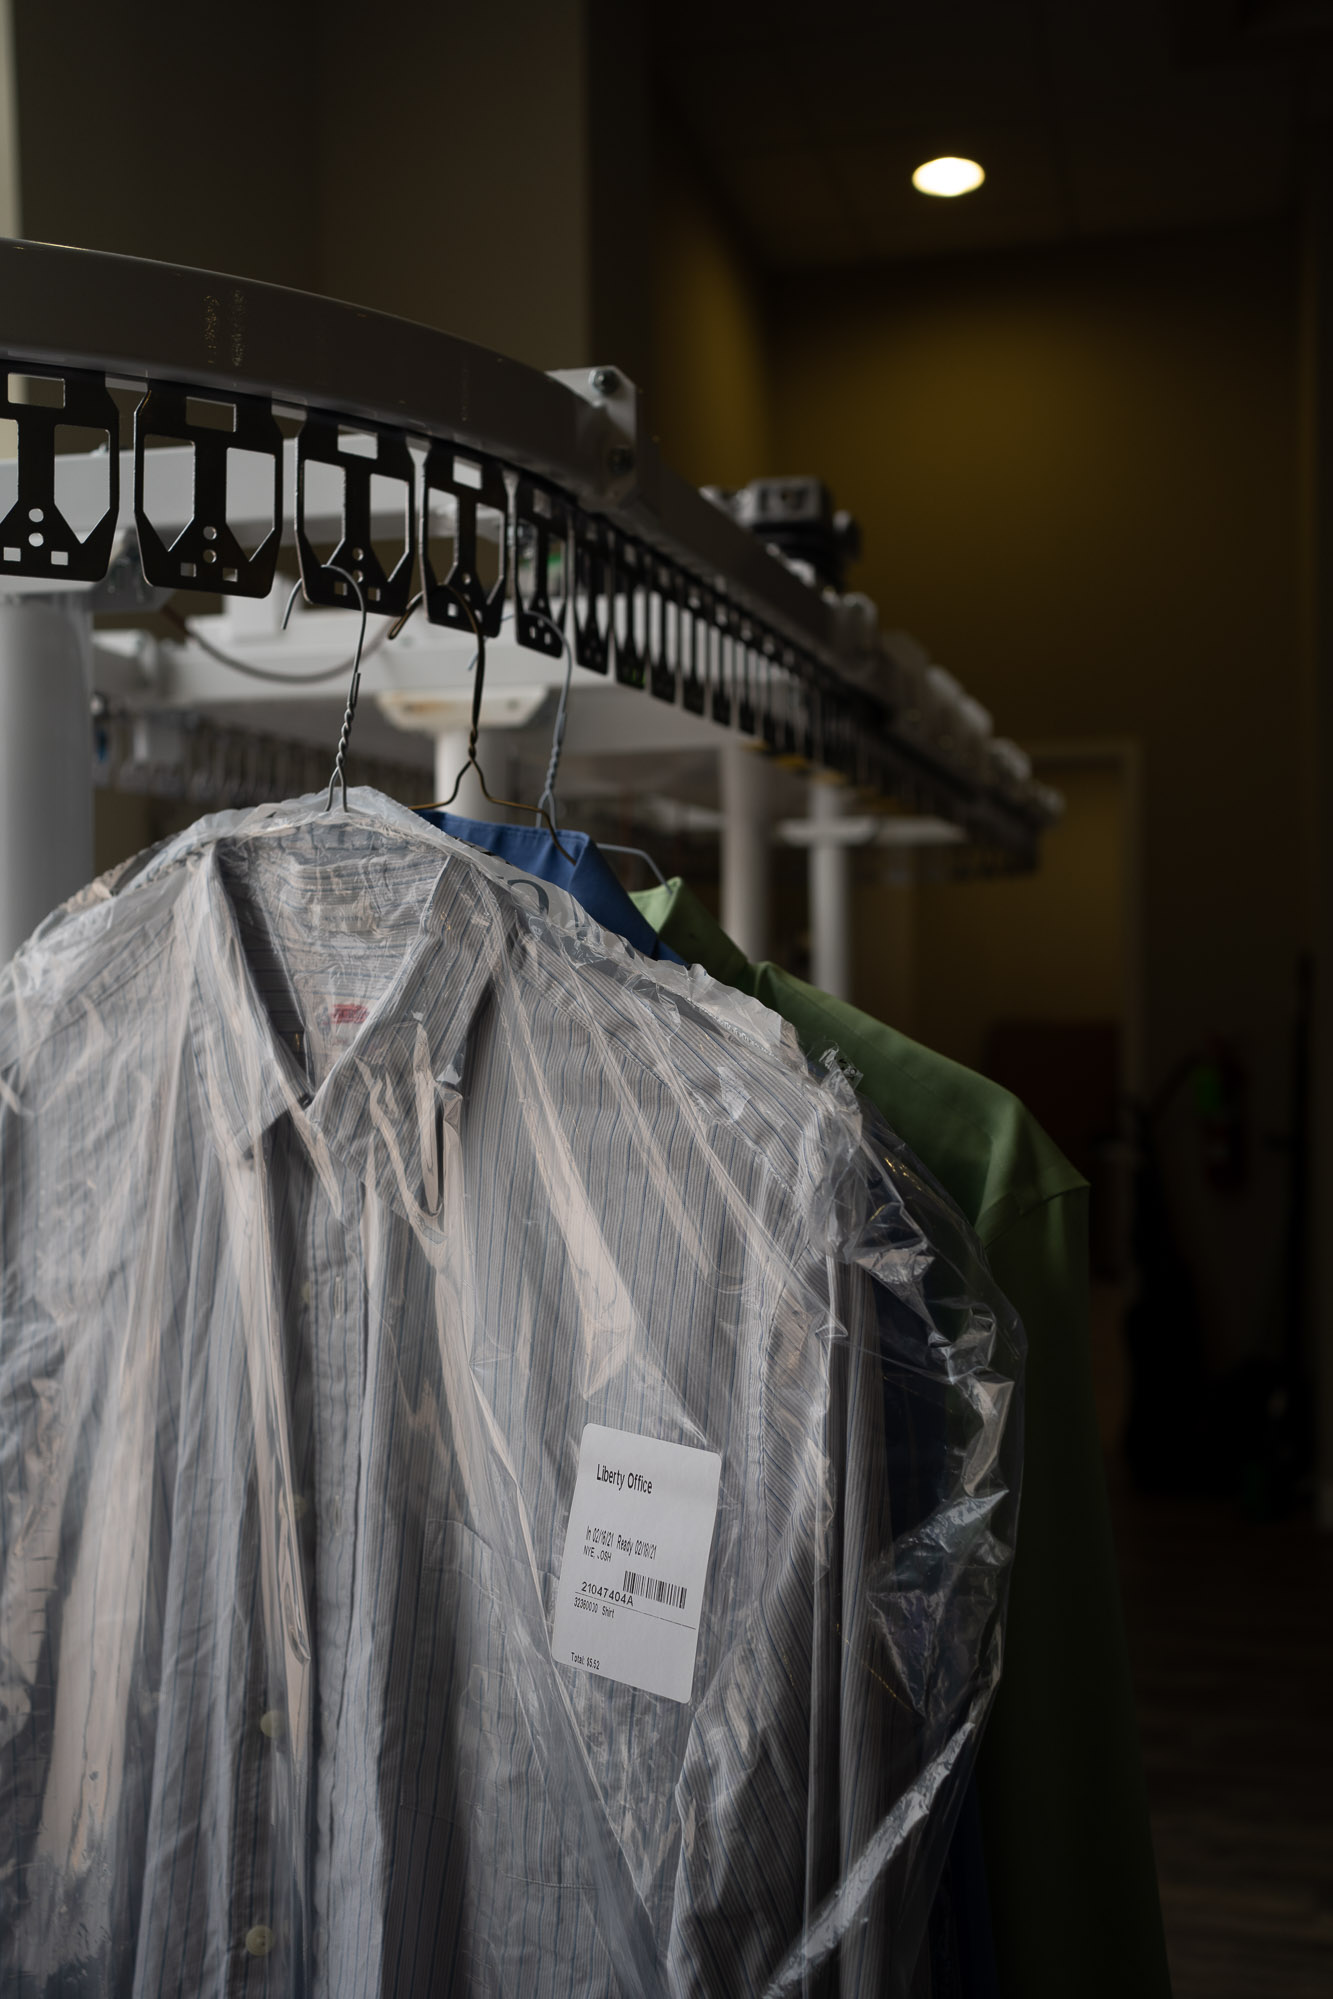 Dry cleaning conveyor system with bagged clothes on it.